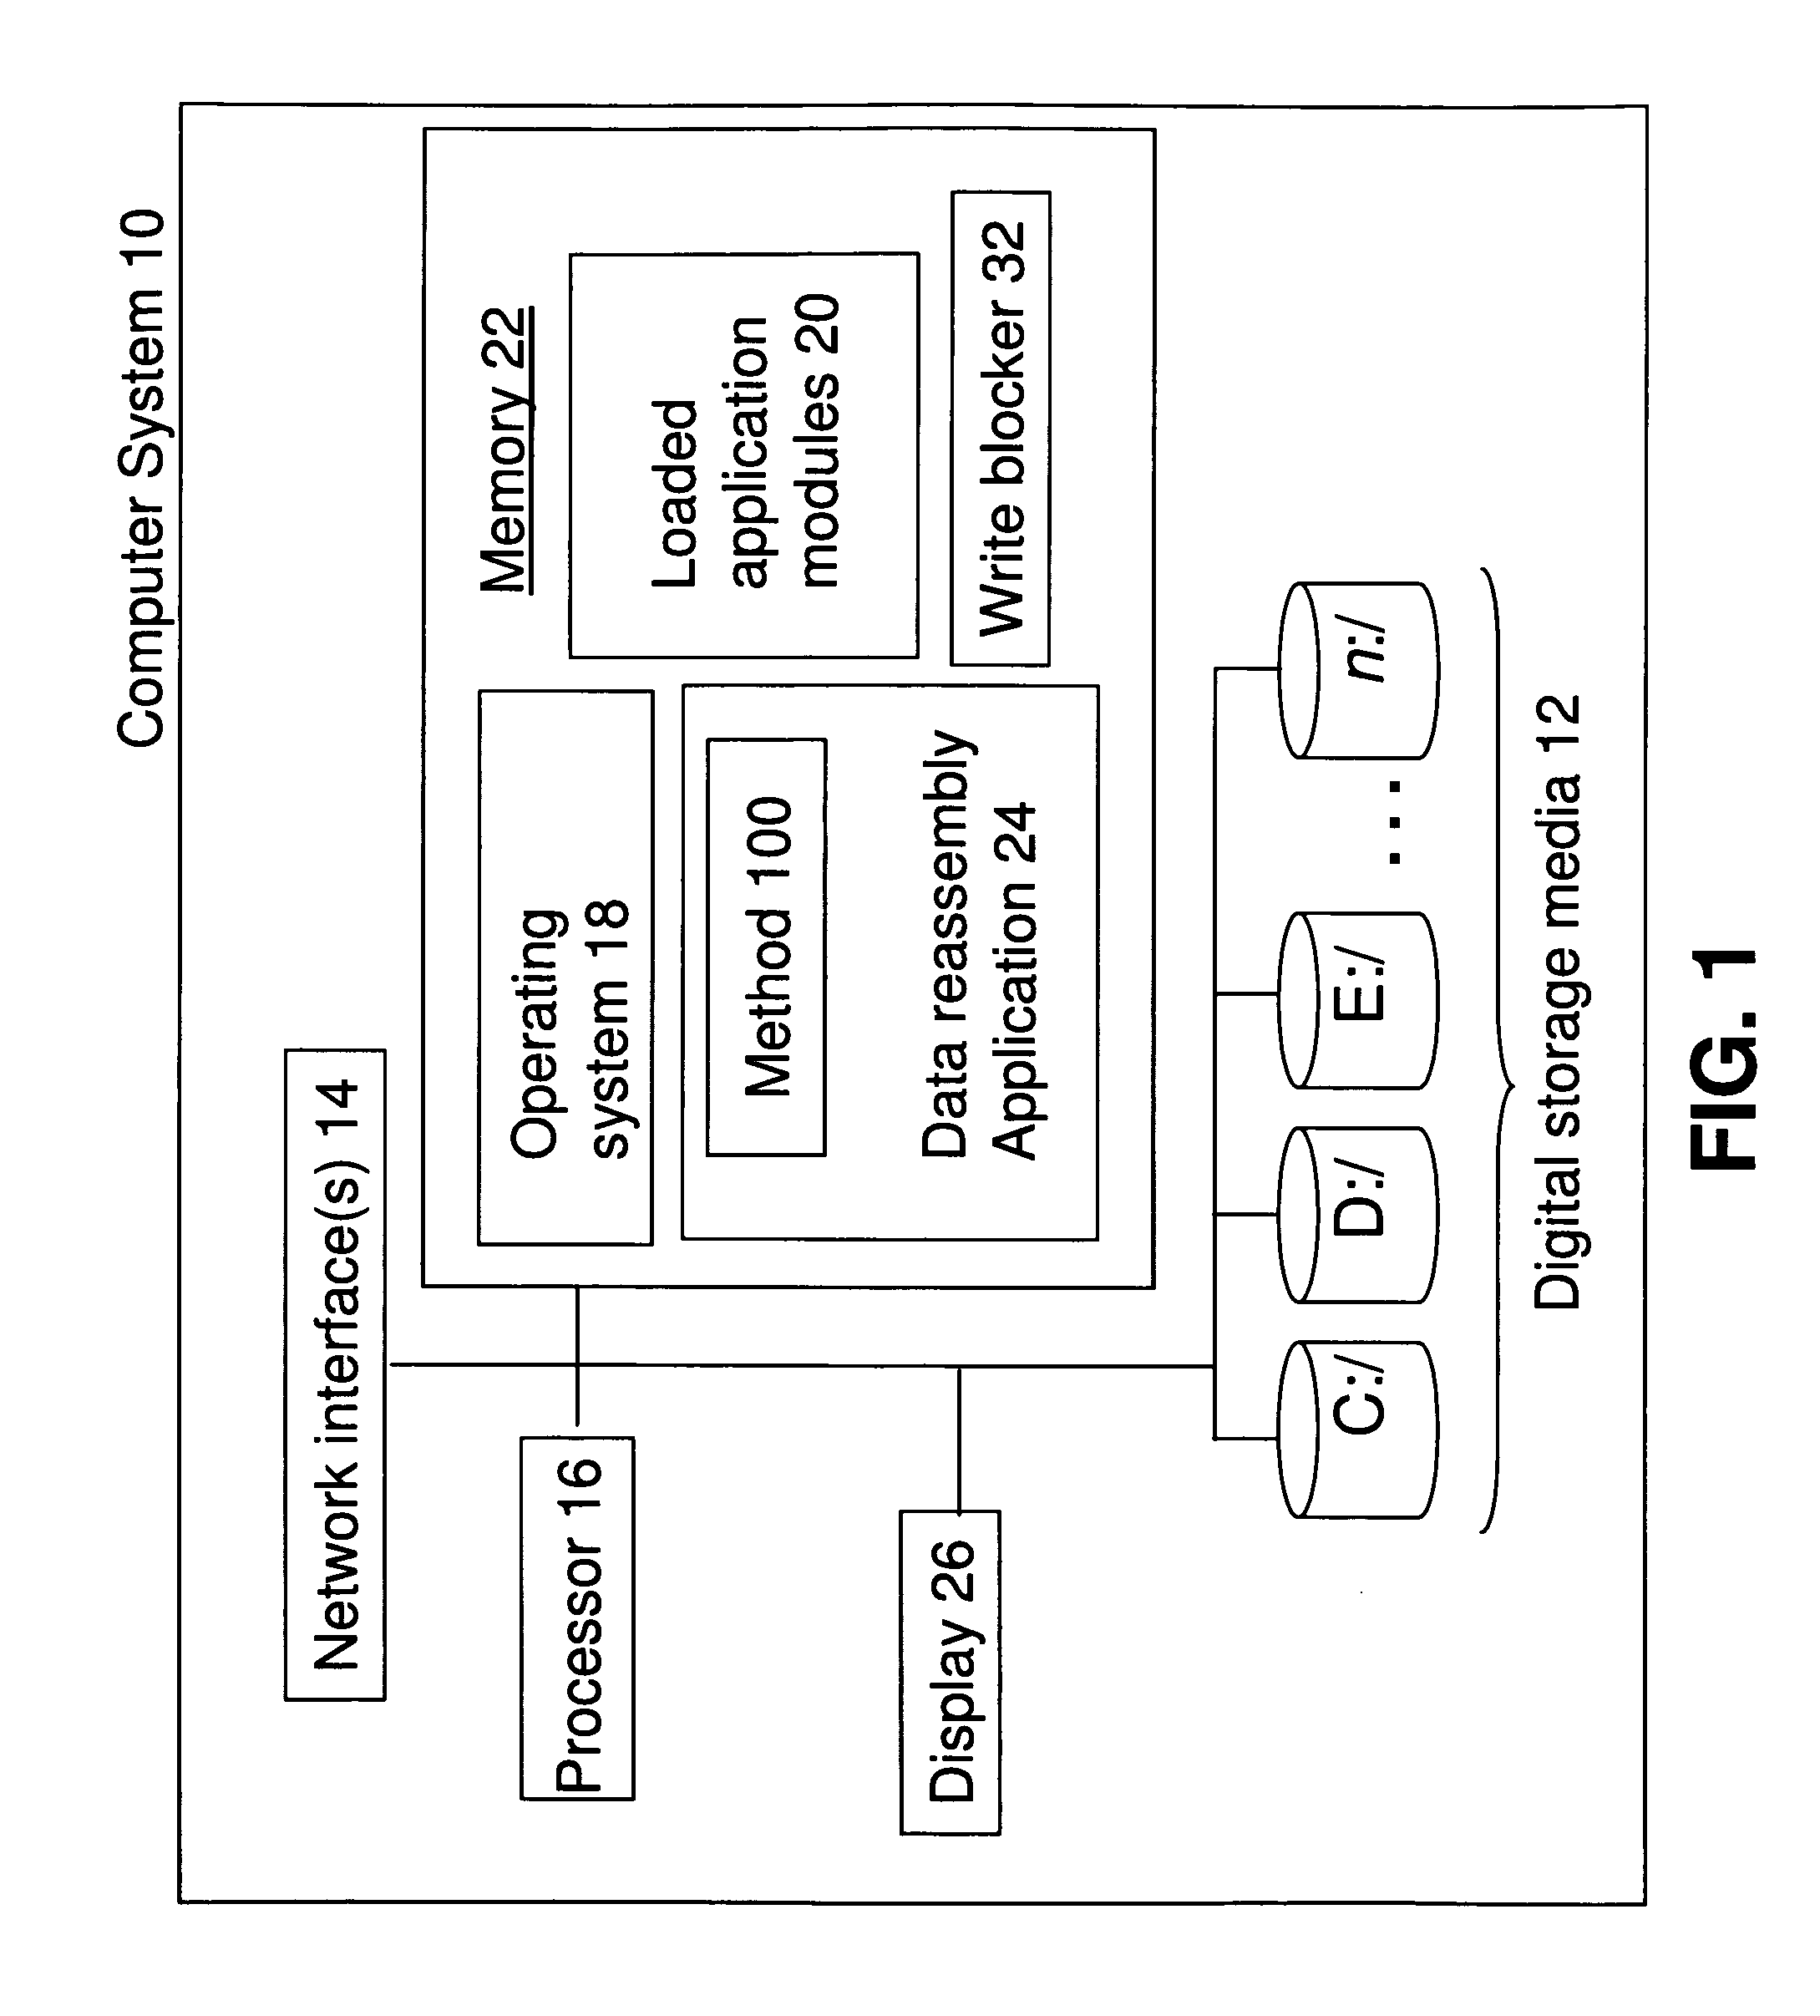 Fragmented data file forensic recovery system and method